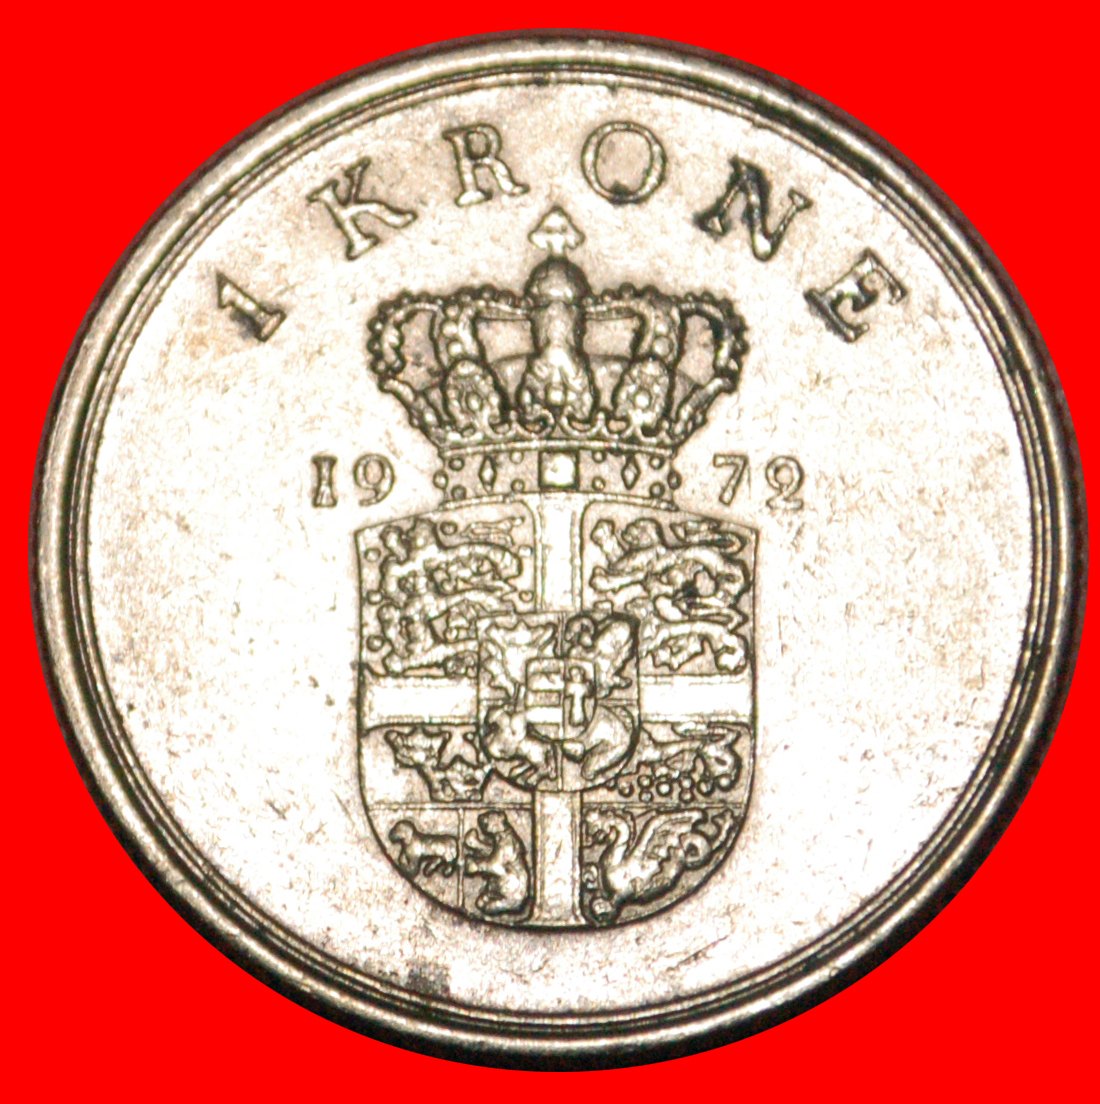  * GREENLAND and FAROE ISLANDS (1960-1972): DENMARK ★ 1 CROWN 1972! LOW START! ★ NO RESERVE!   